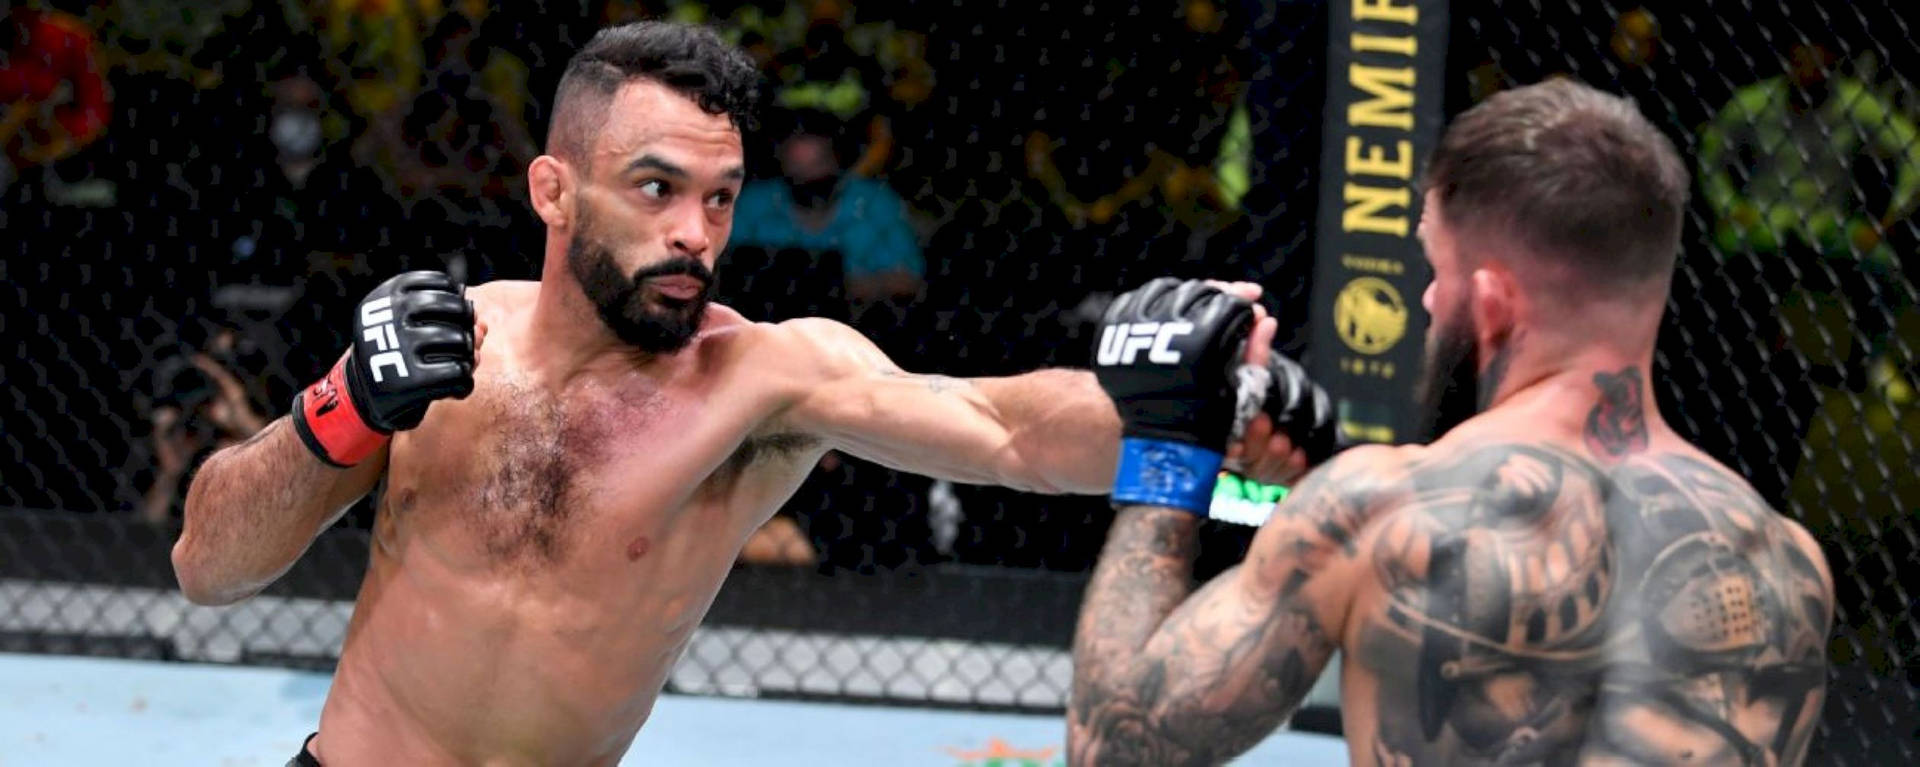 Rob Font Striking His Opponent Wallpaper